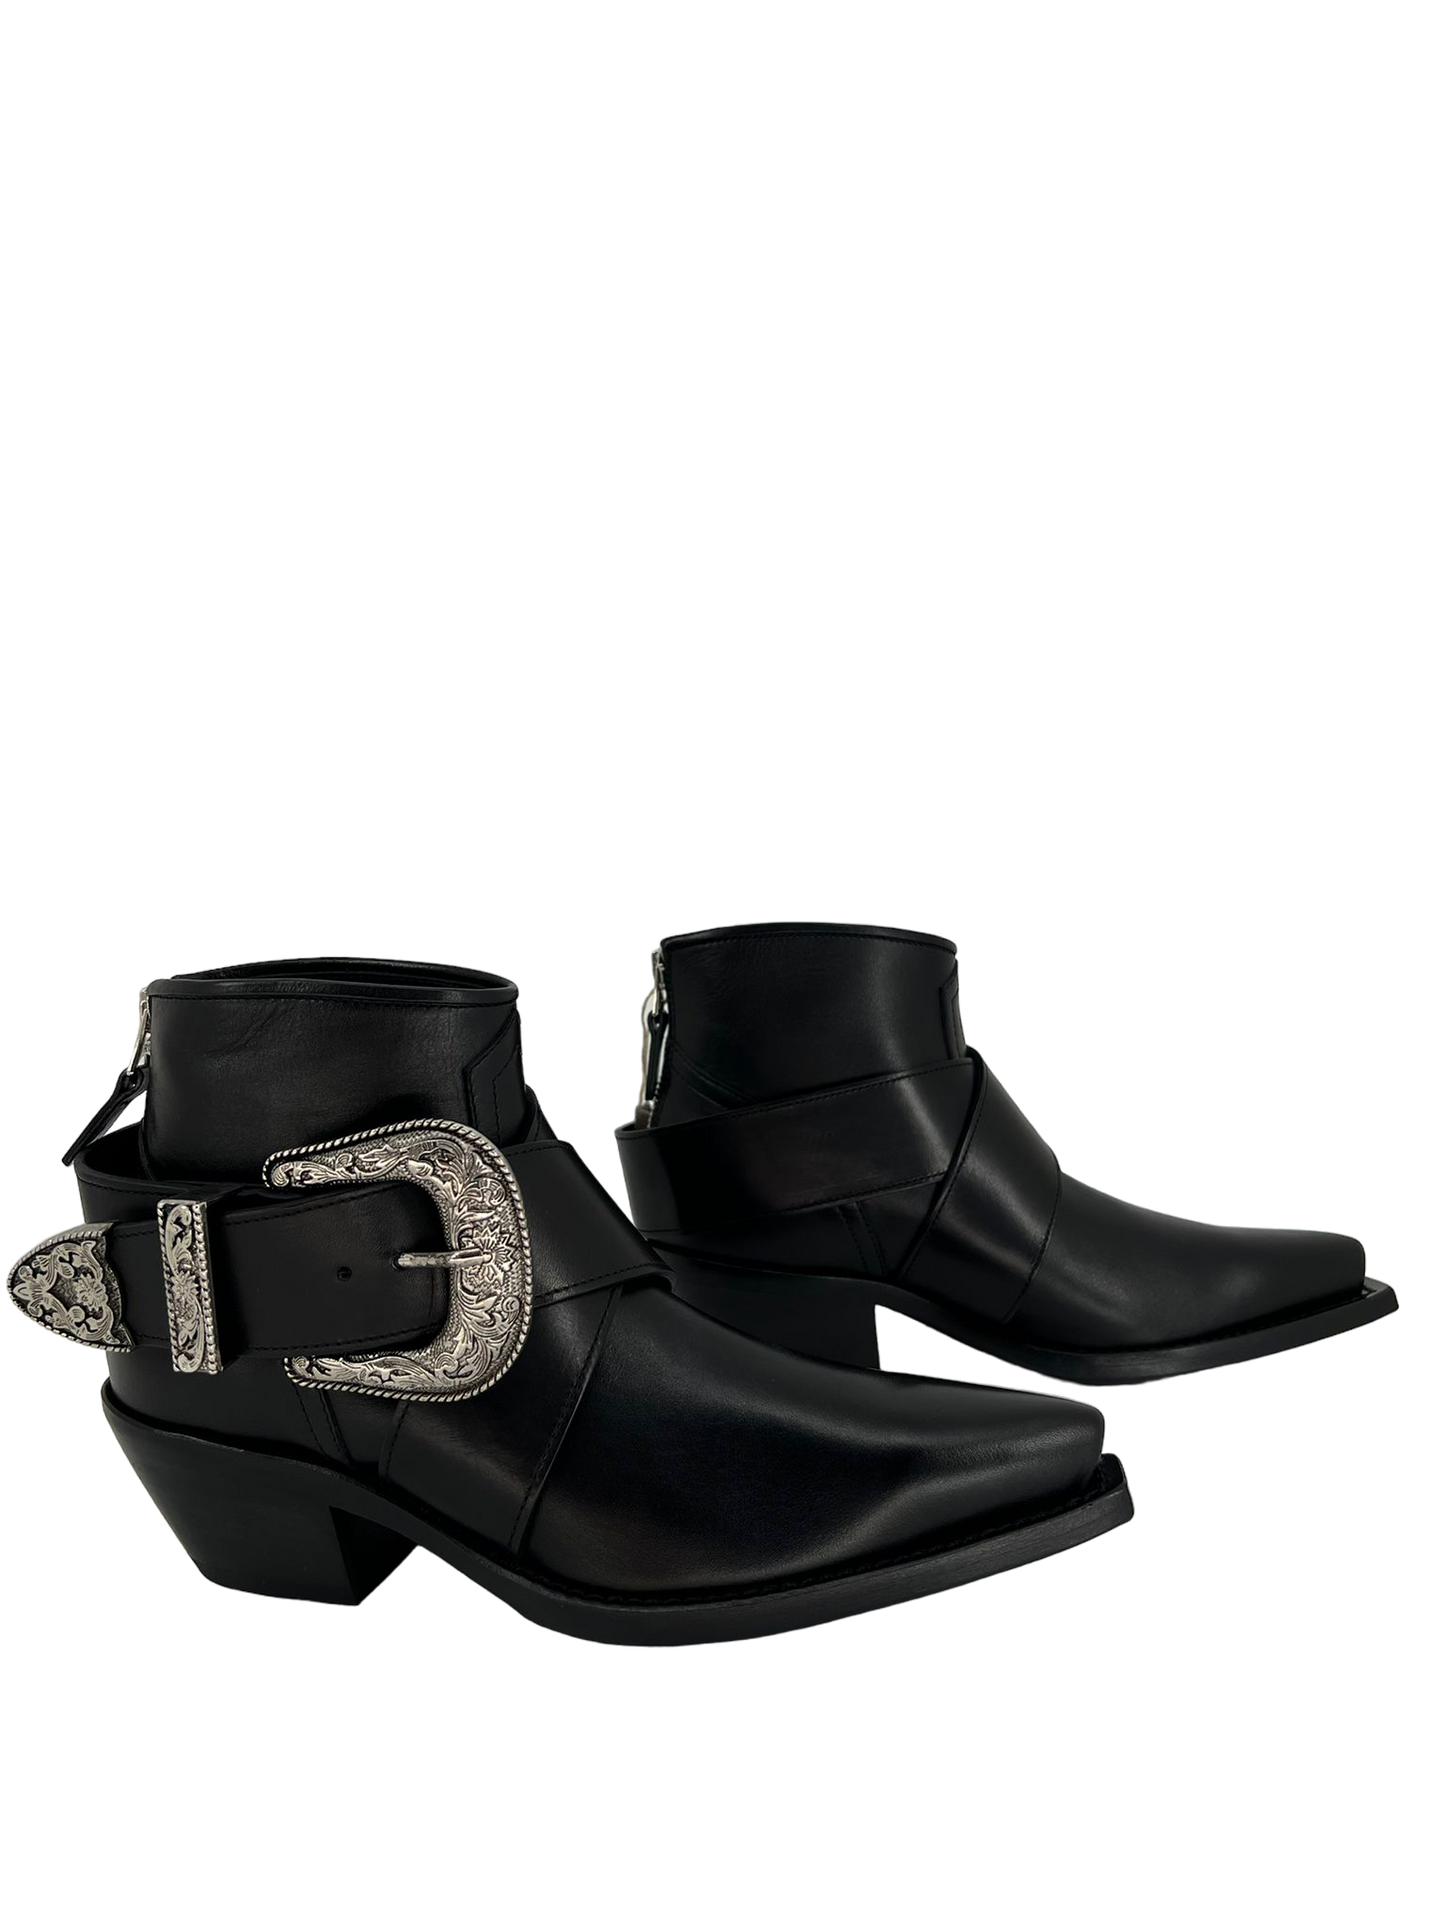 Buckled Gloss boots